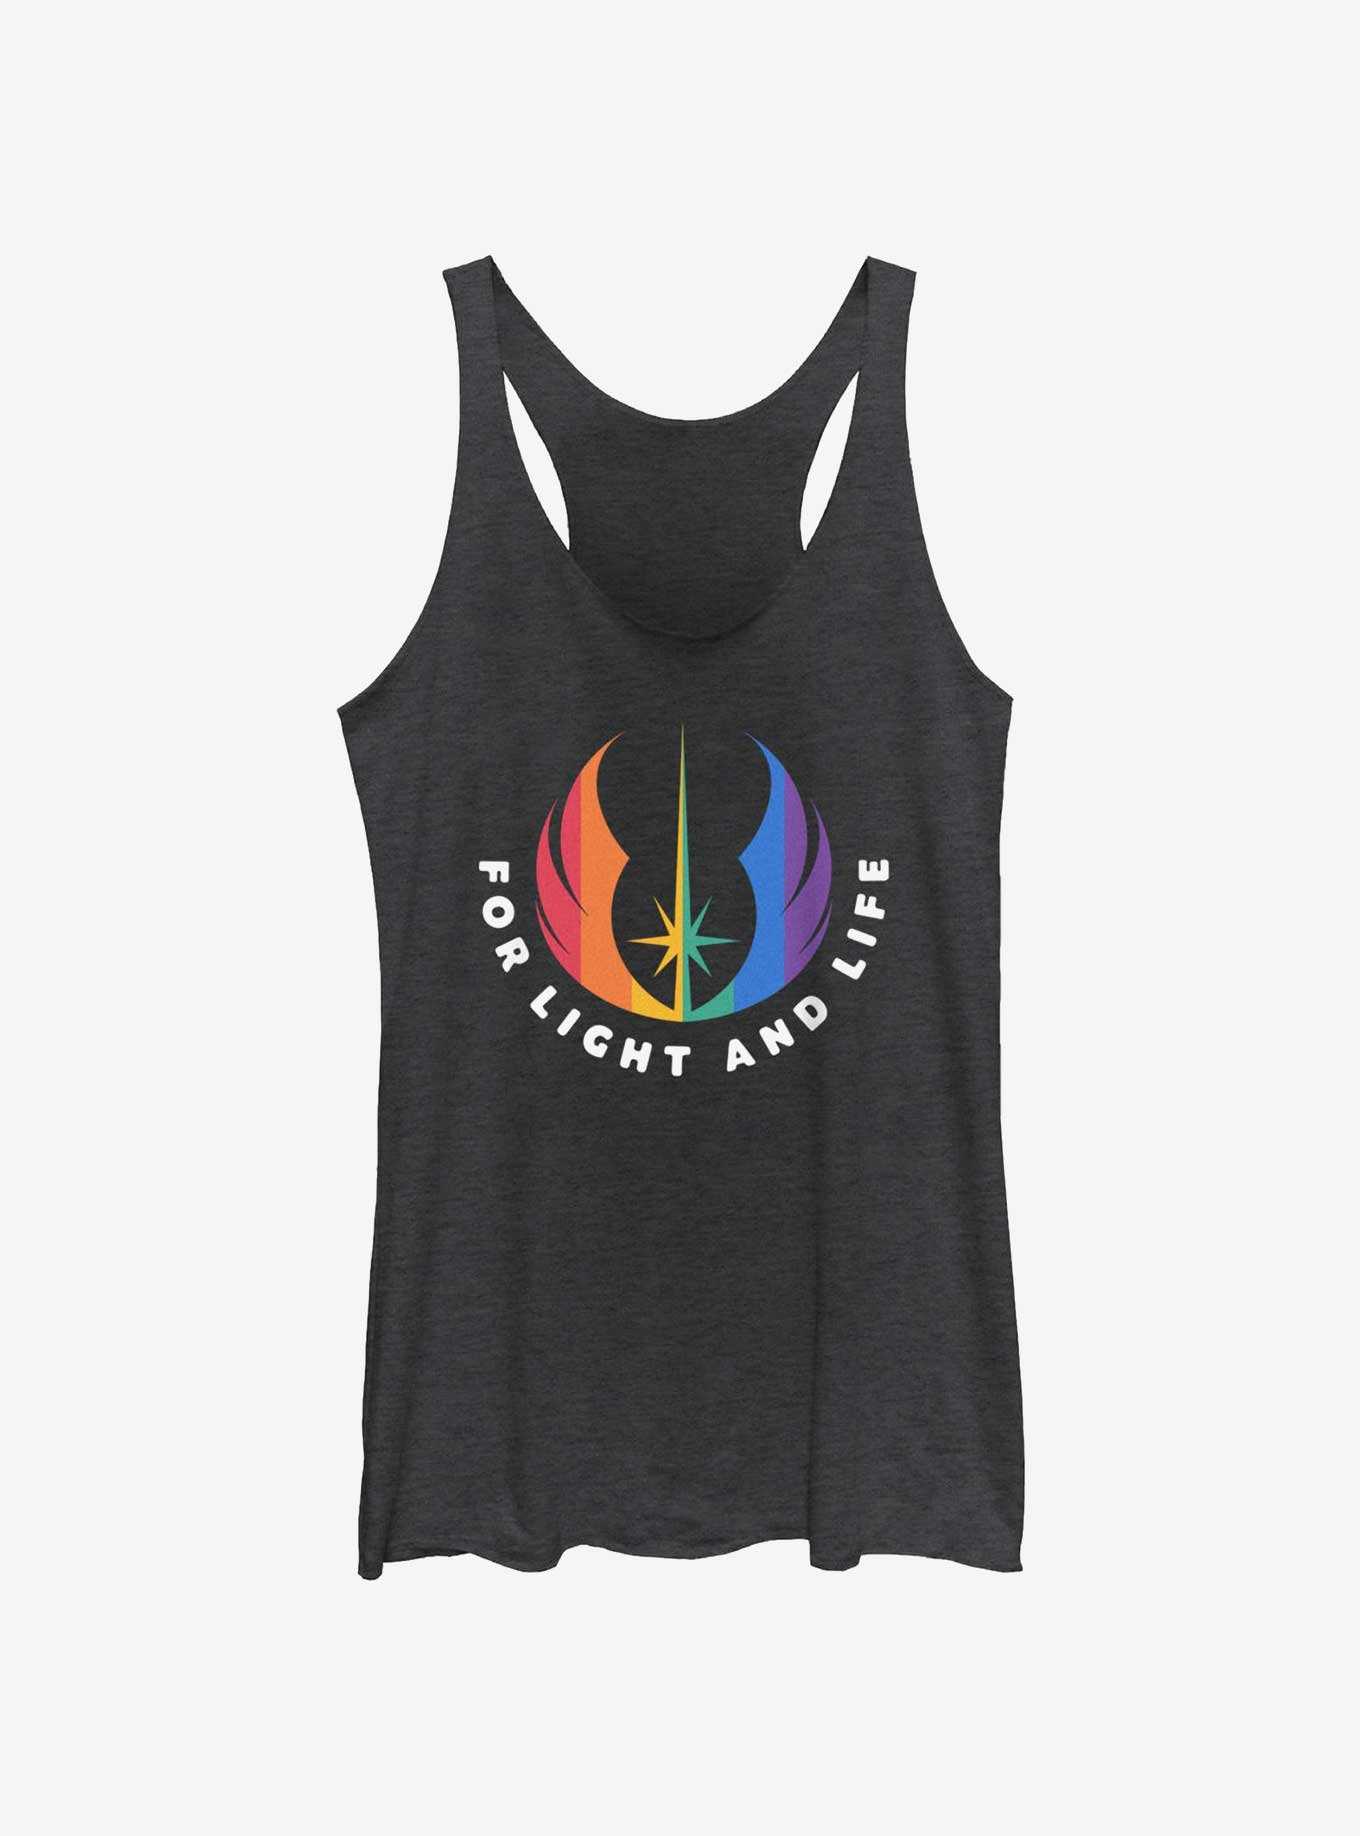 Star Wars For Light And Life Pride Tank, , hi-res